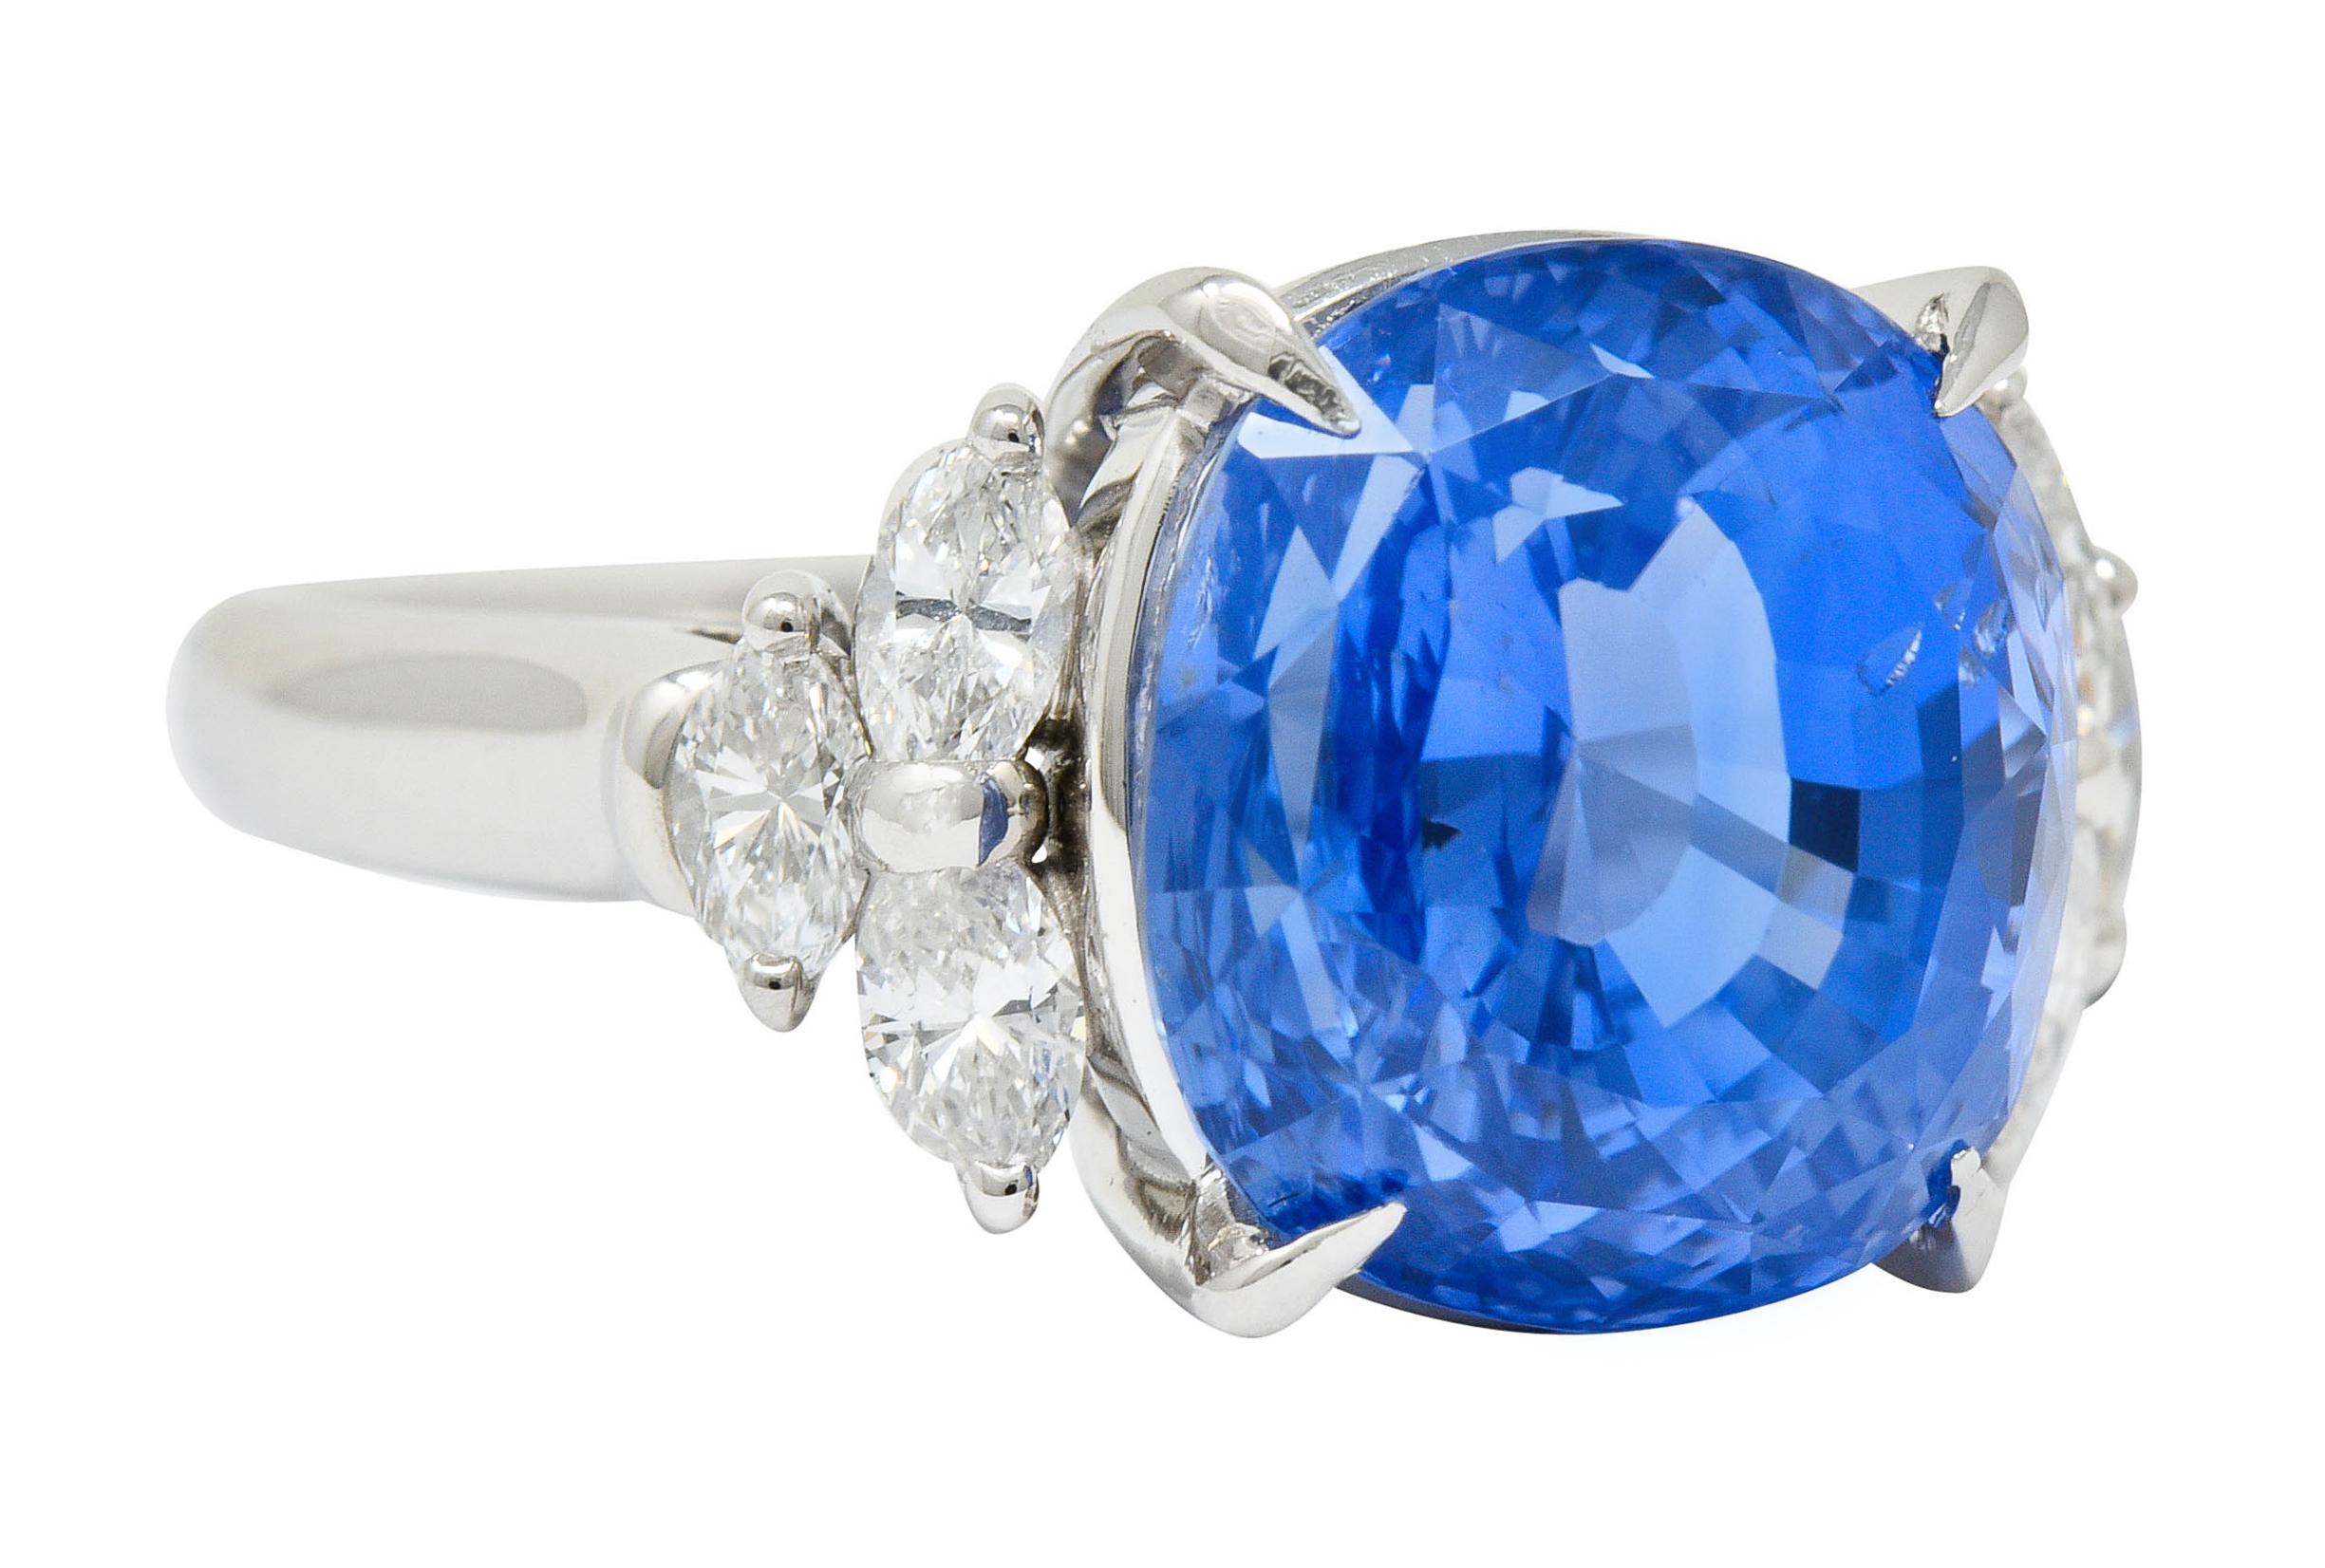 Centering a basket set modified cushion brilliant Ceylon sapphire weighing 10.14 carats

Transparent, cornflower blue, with no indications of heat; Sri Lankan in origin

Flanked by marquise diamond clustered shoulders, weighing in total